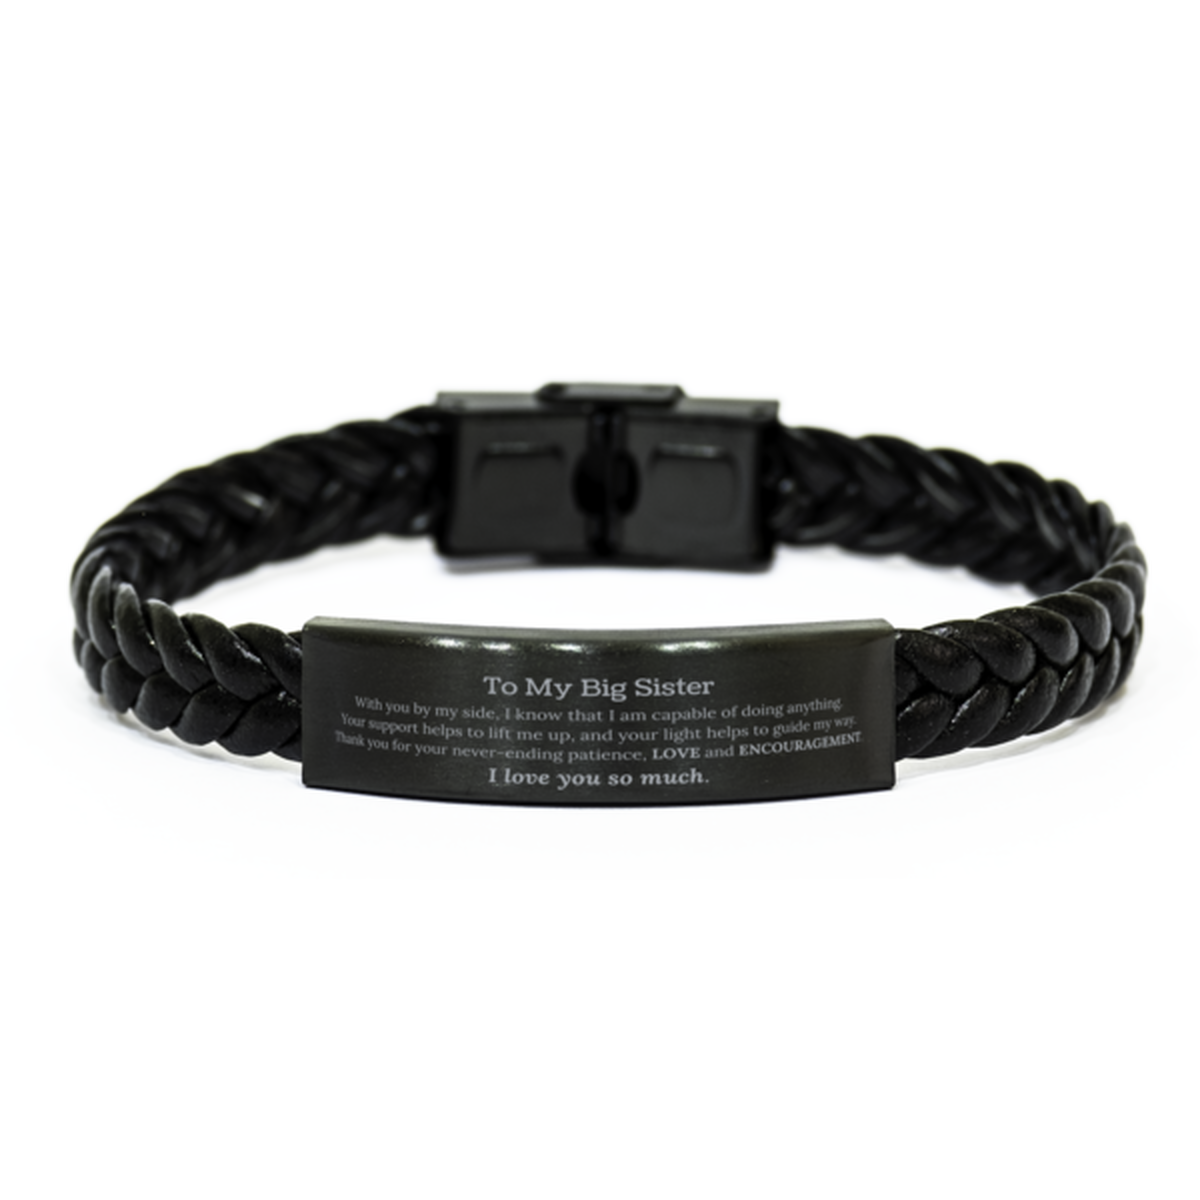 Appreciation Big Sister Braided Leather Bracelet Gifts, To My Big Sister Birthday Christmas Wedding Keepsake Gifts for Big Sister With you by my side, I know that I am capable of doing anything. I love you so much